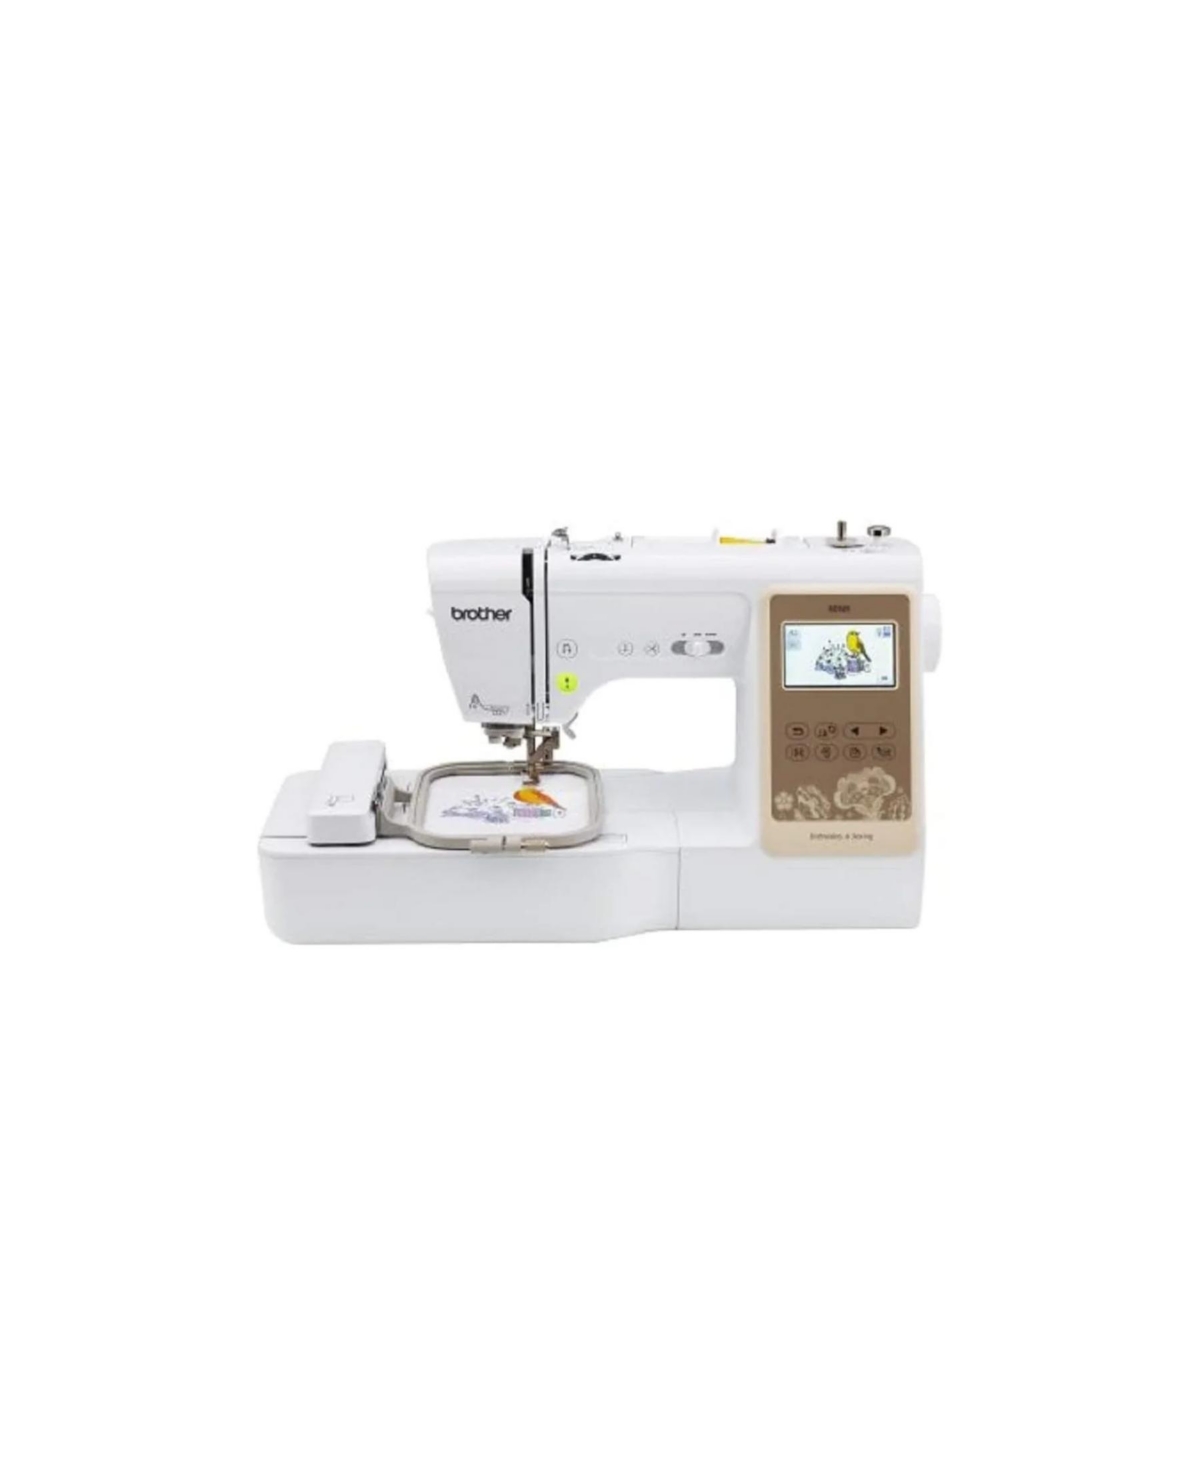 SE625 Sewing and Embroidery Machine 4x4 - White